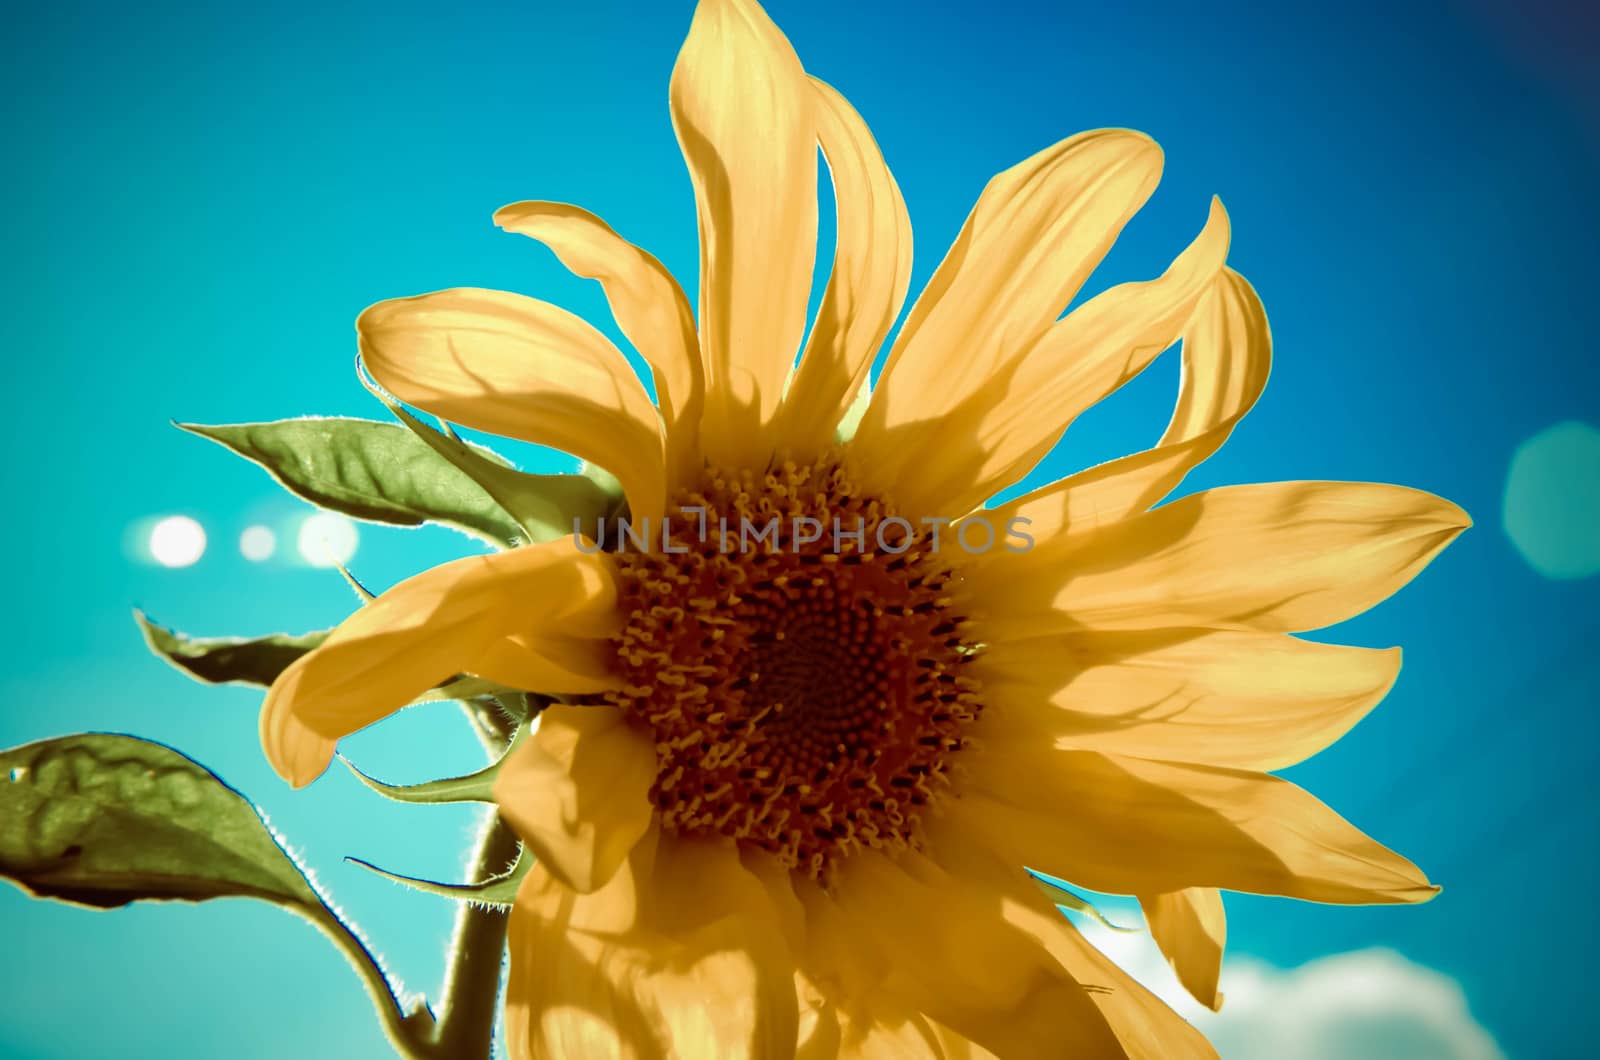 Sunflower on the sky in the summer by kimbo-bo